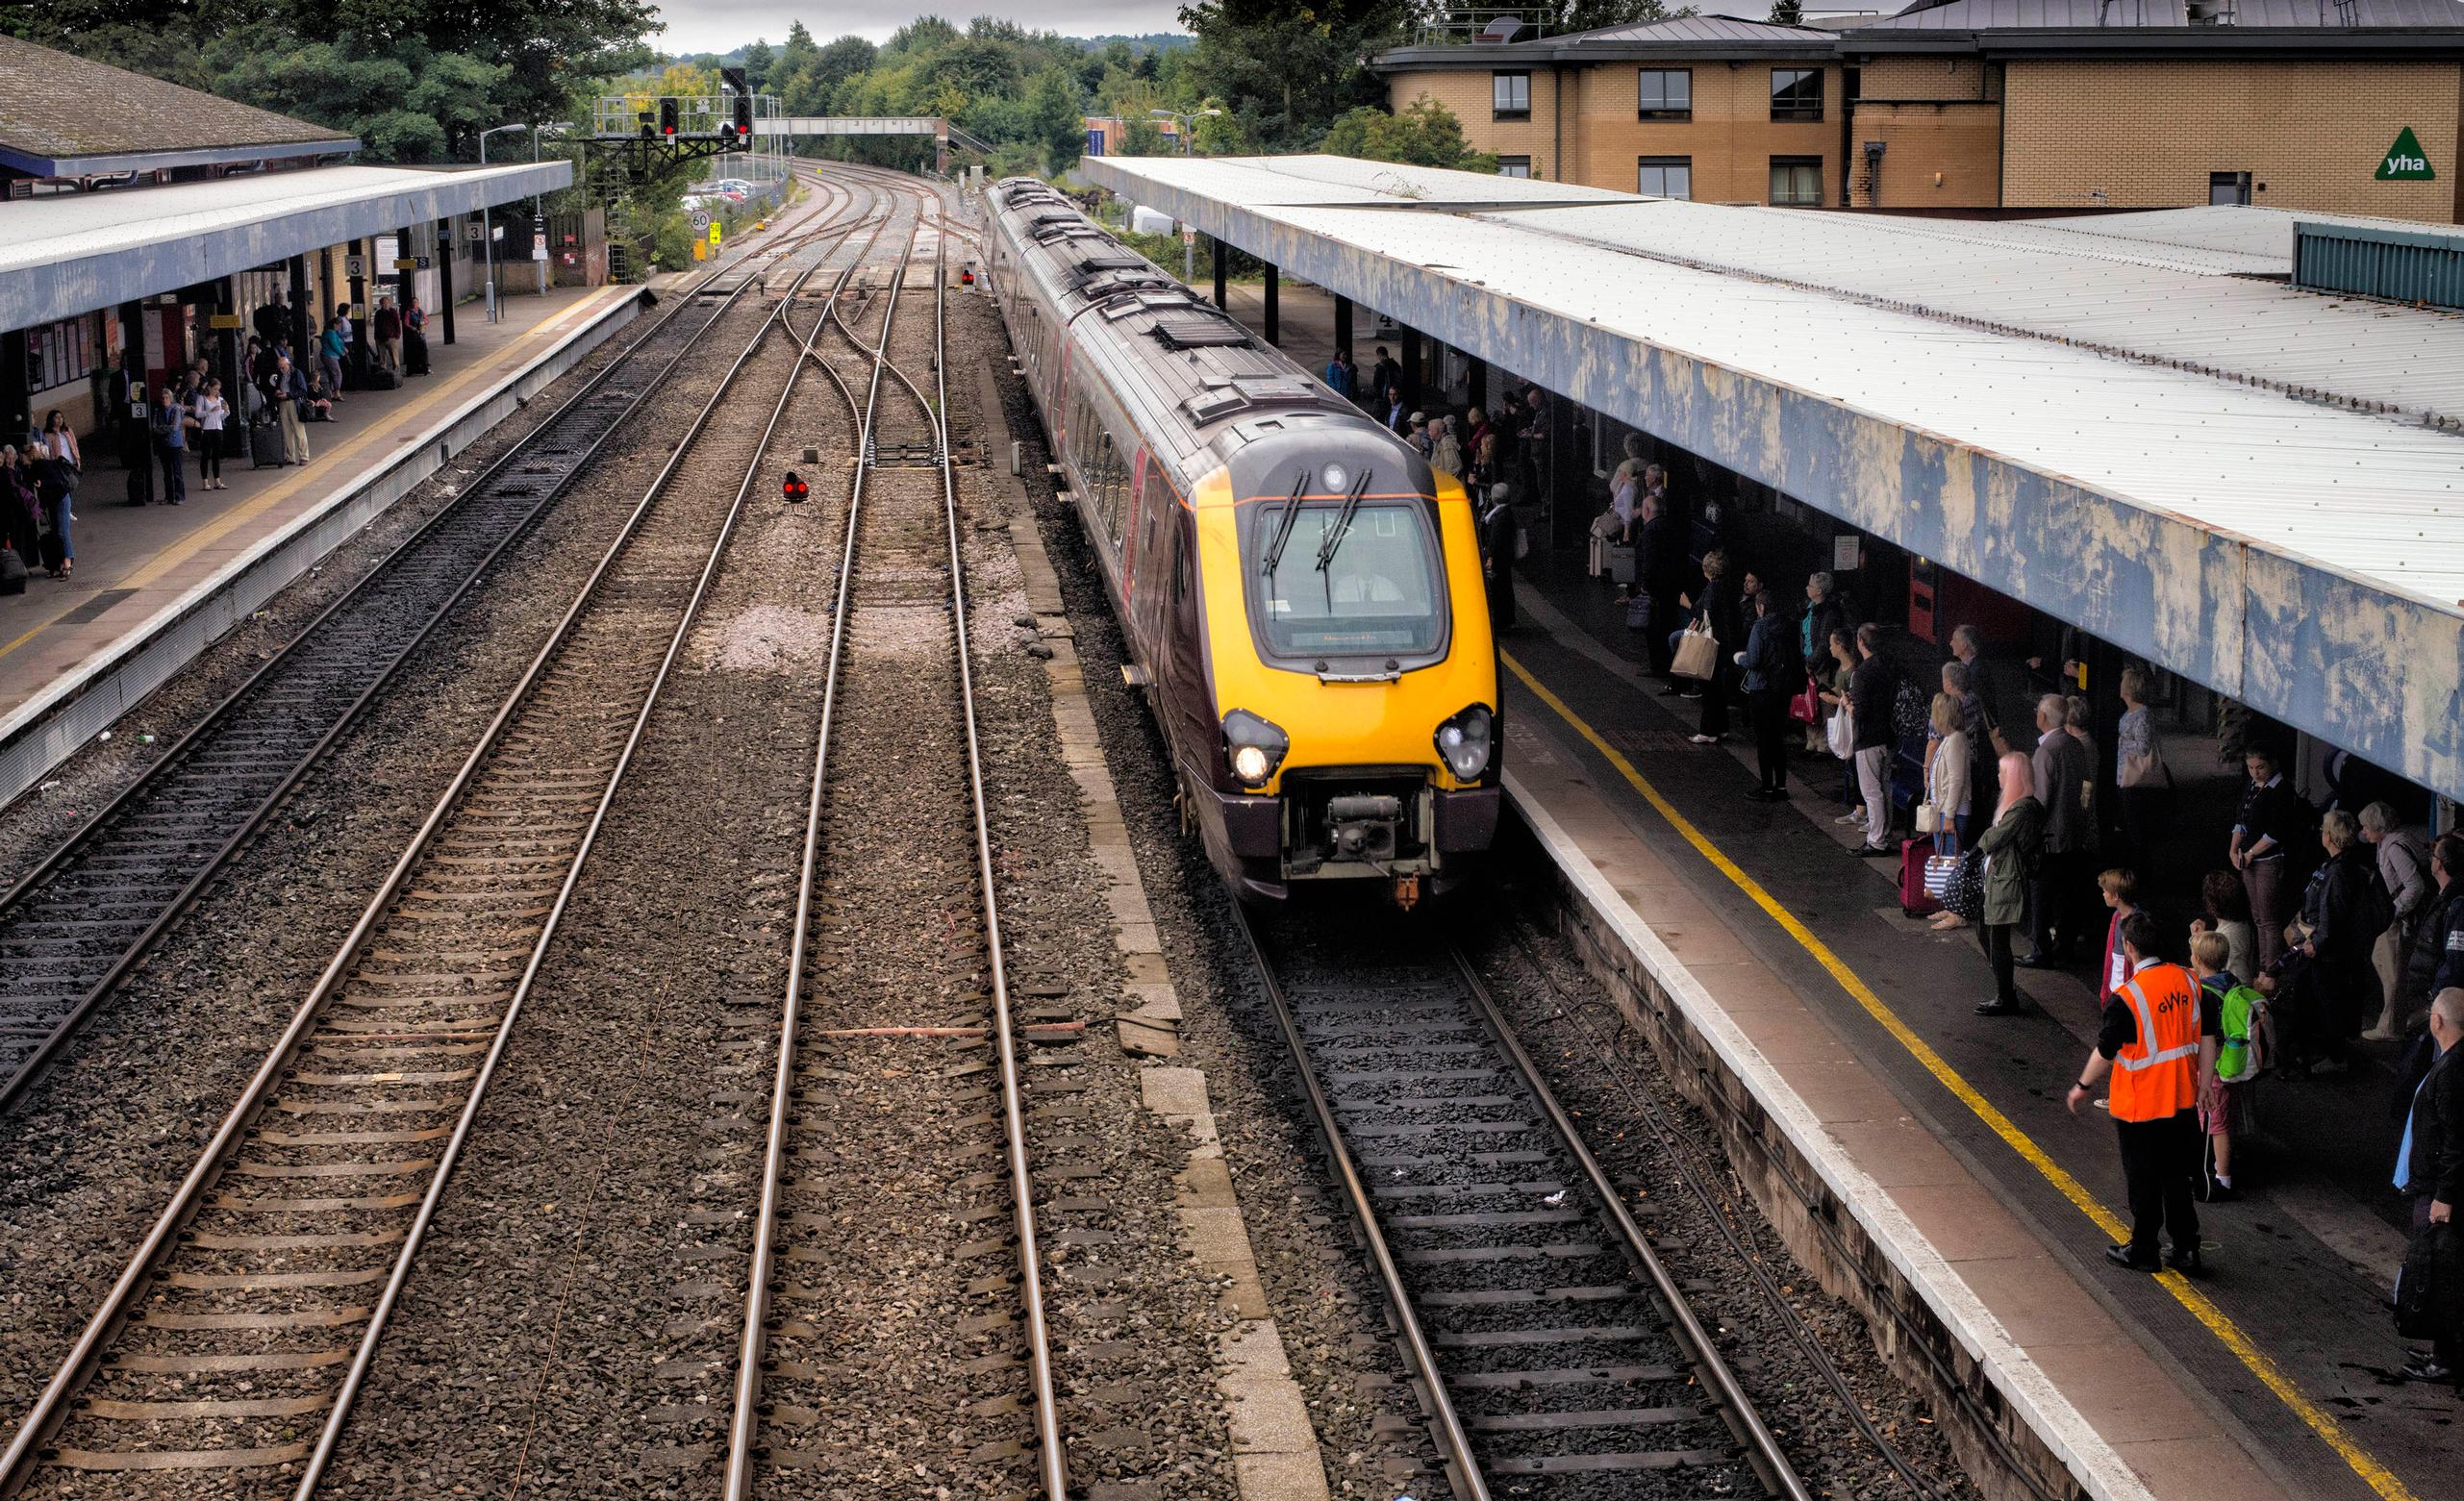 Network Rail opposes plan to develop Oxford railway station